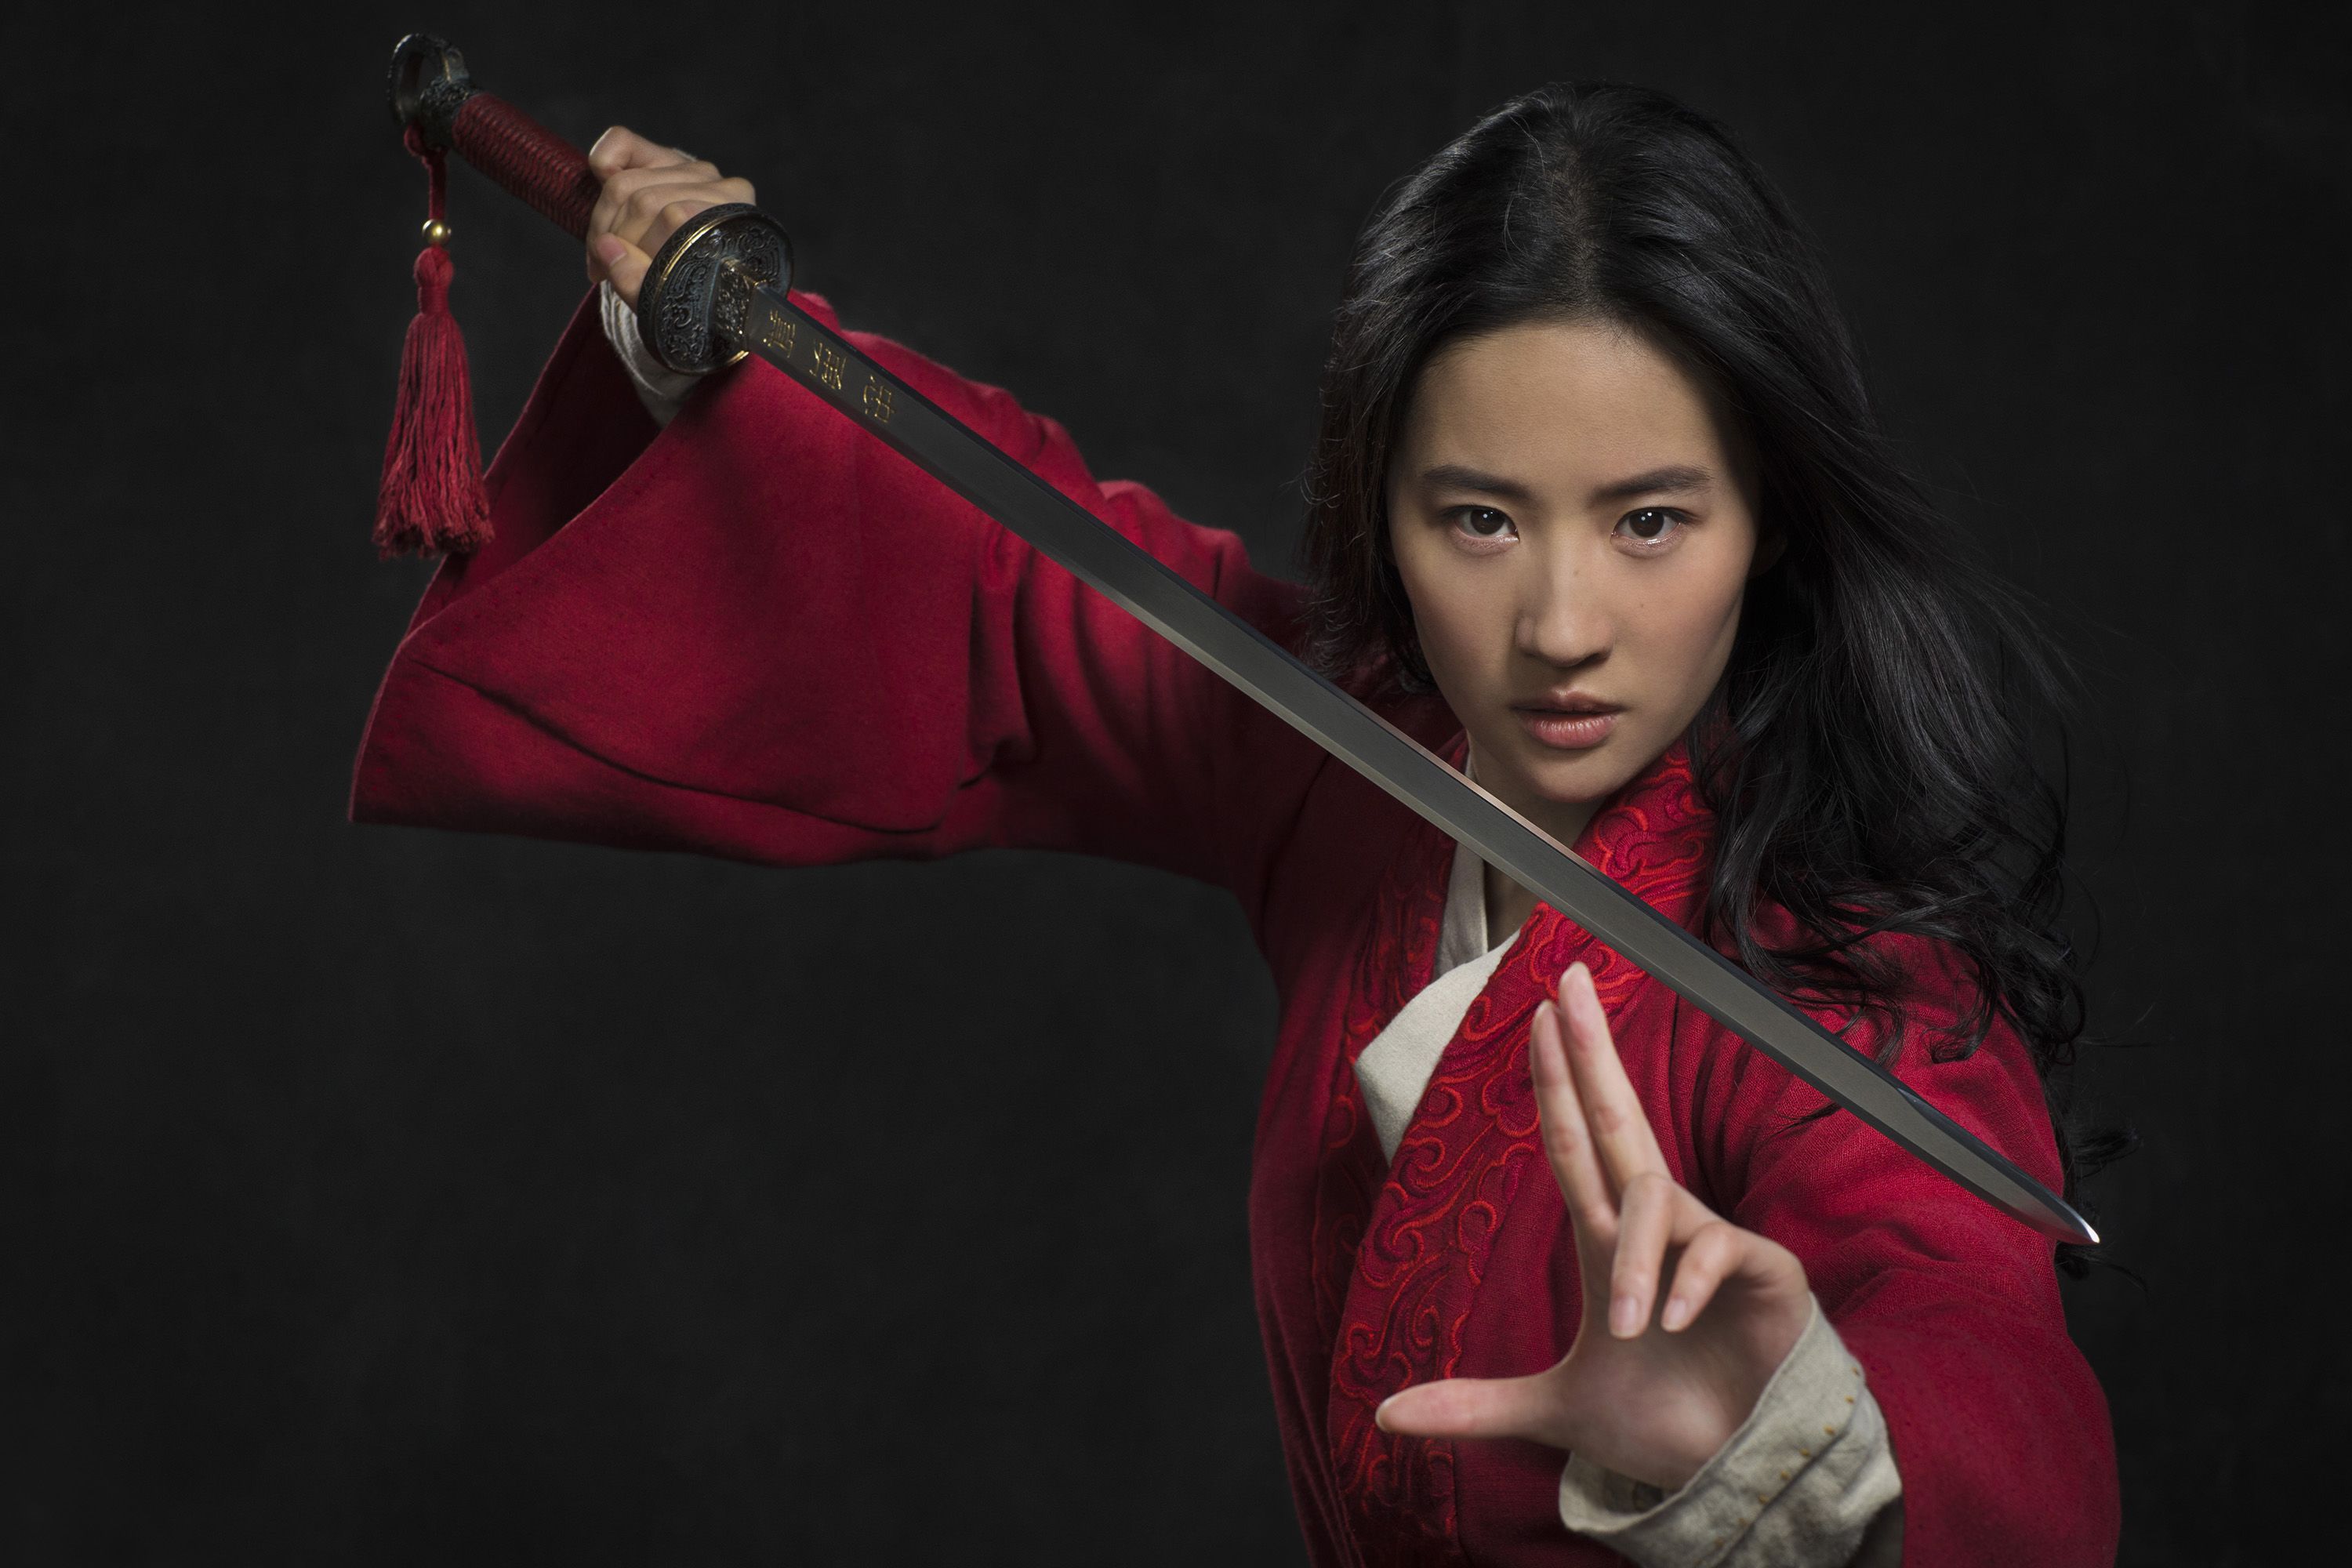 Mulan' live action trailer shows how fierce of a fighter she is | CNN